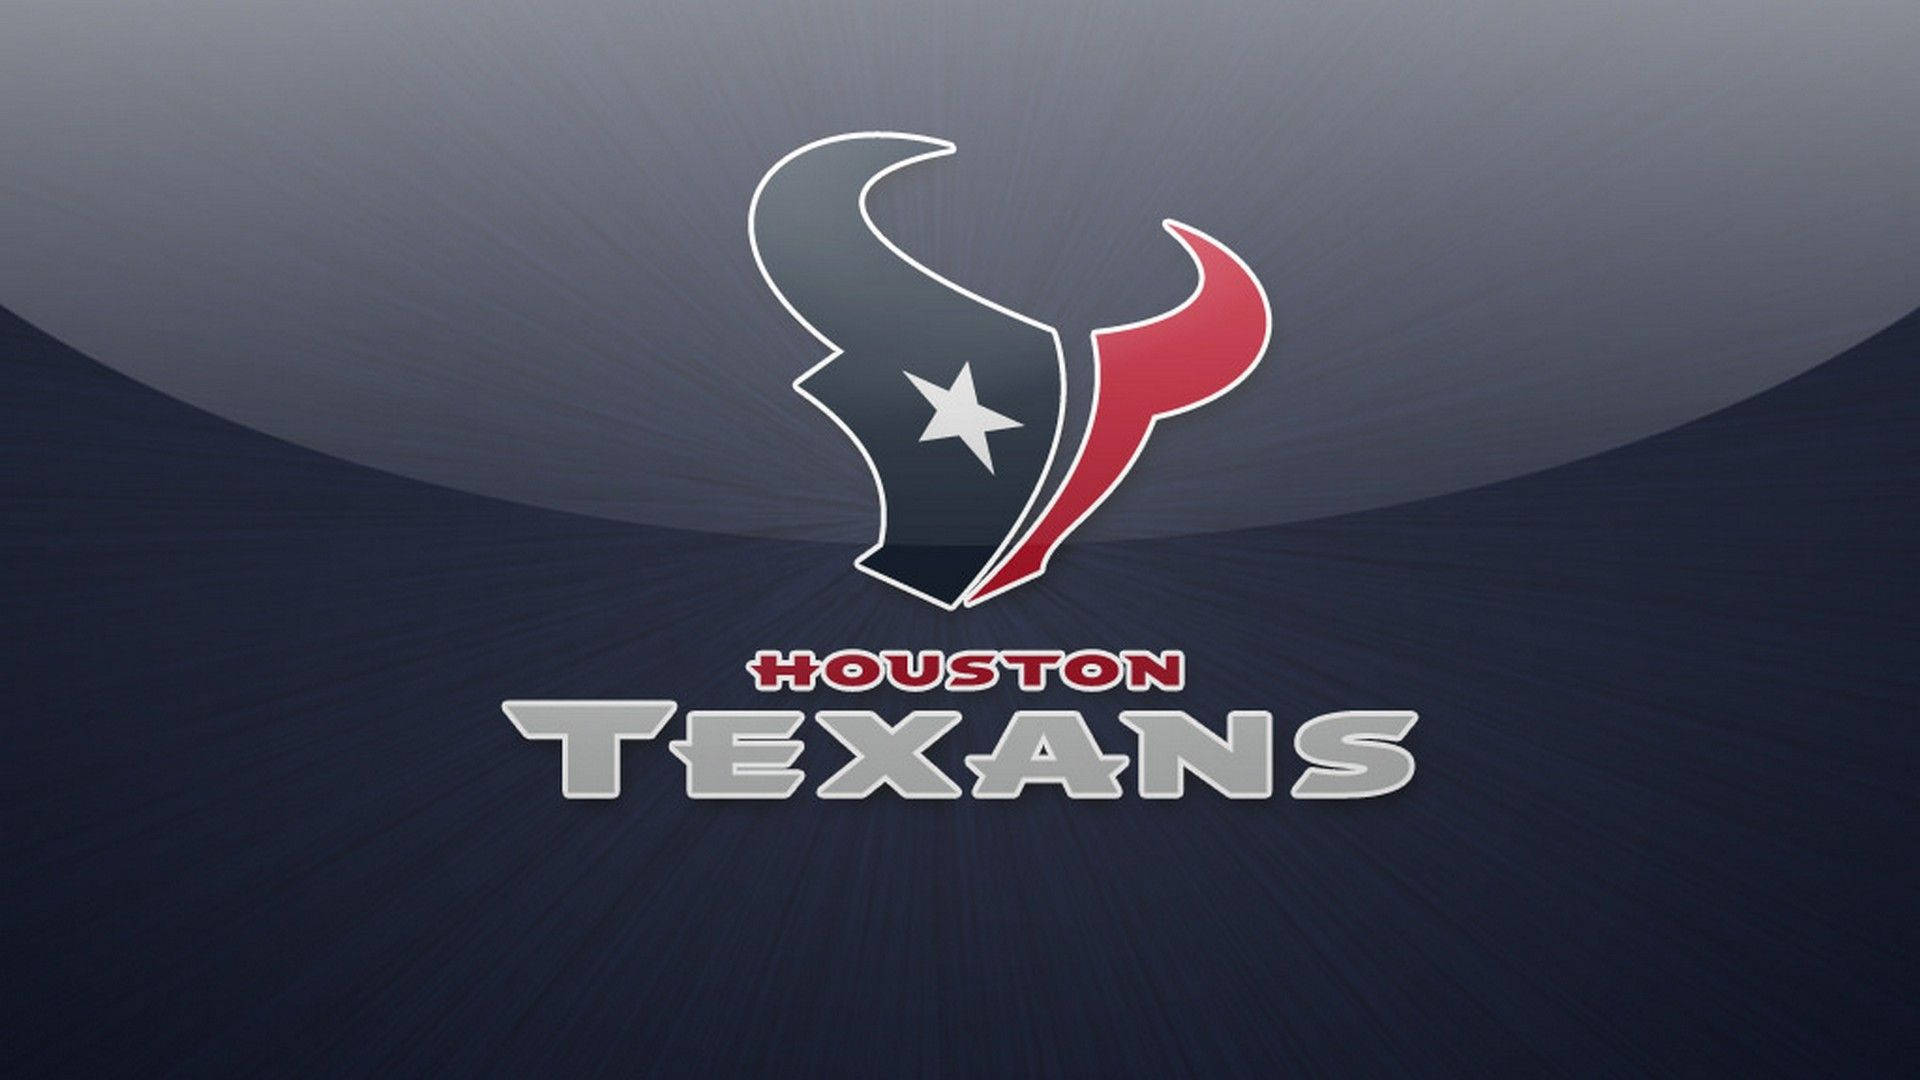 The Houston Texans Showing Their Pride Wallpaper